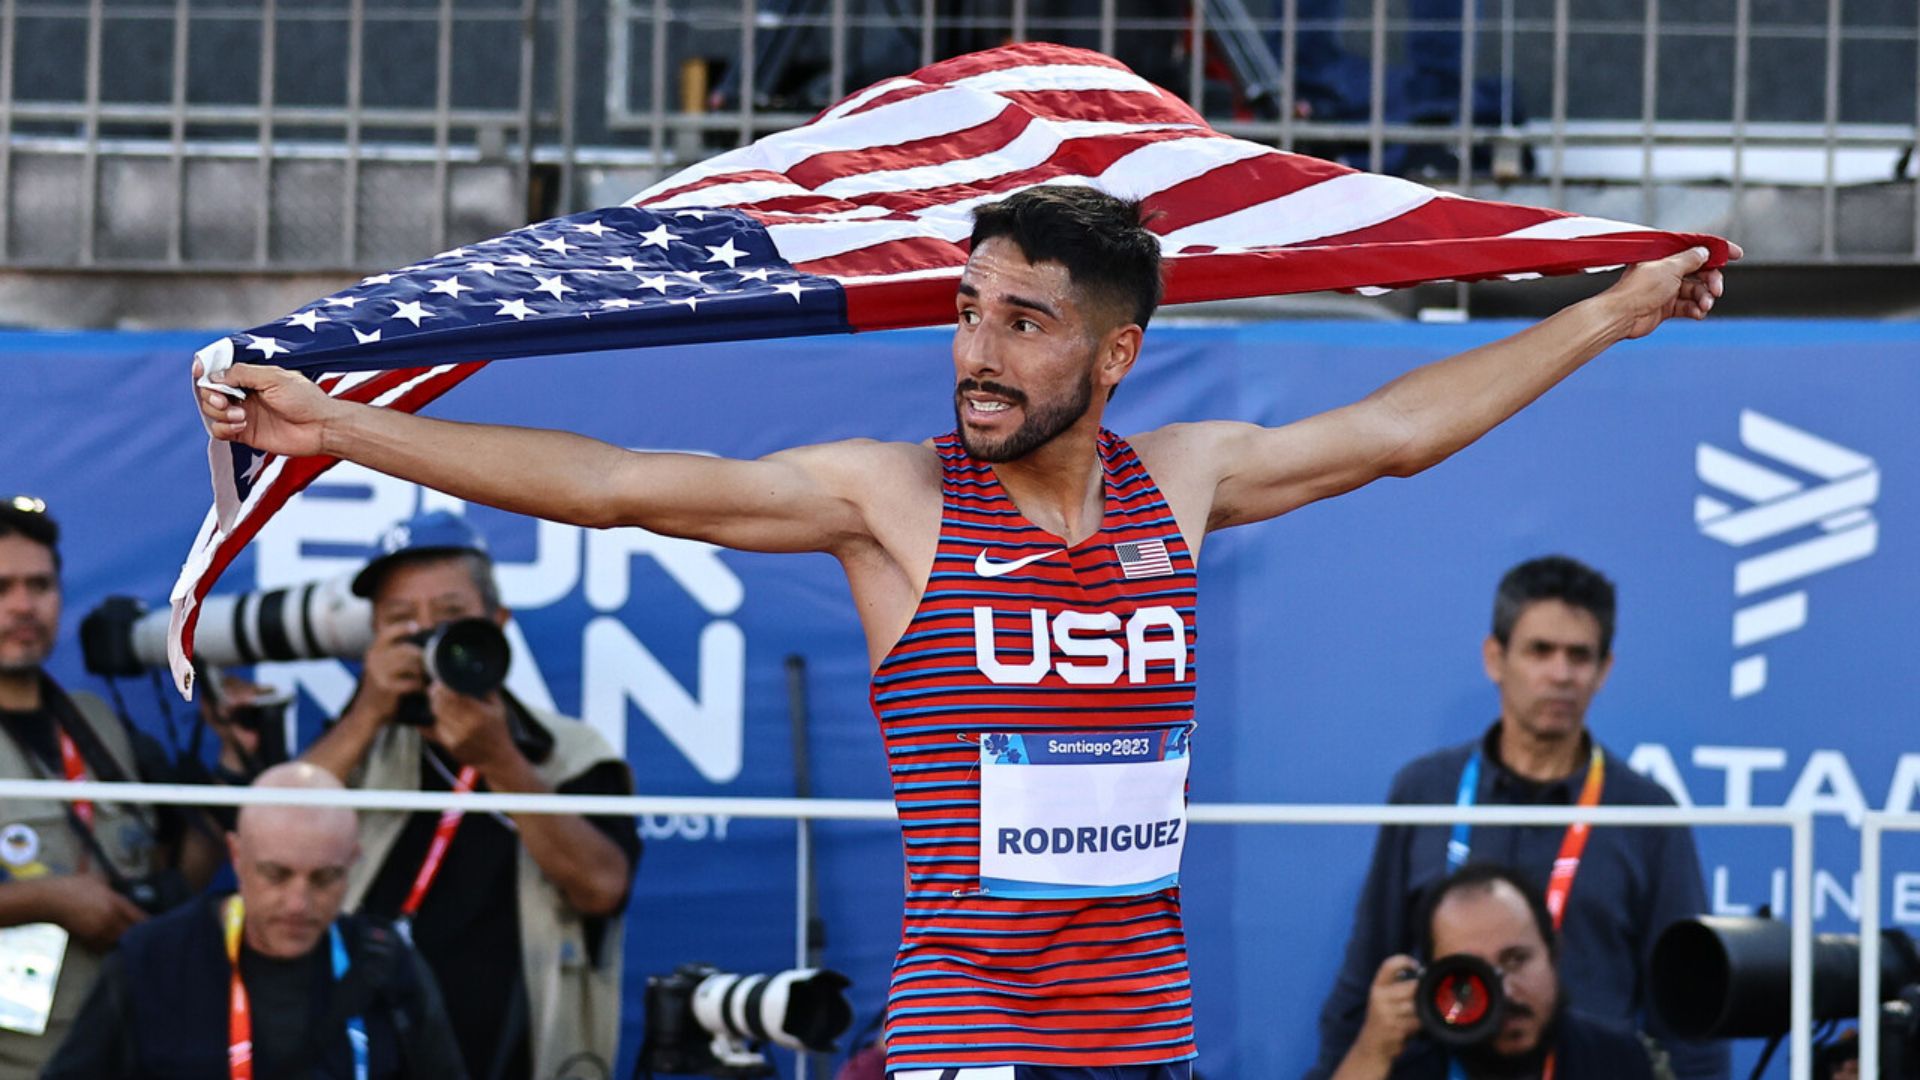 Impressive gold for the American Isai Rodríguez in the 10,000 meters